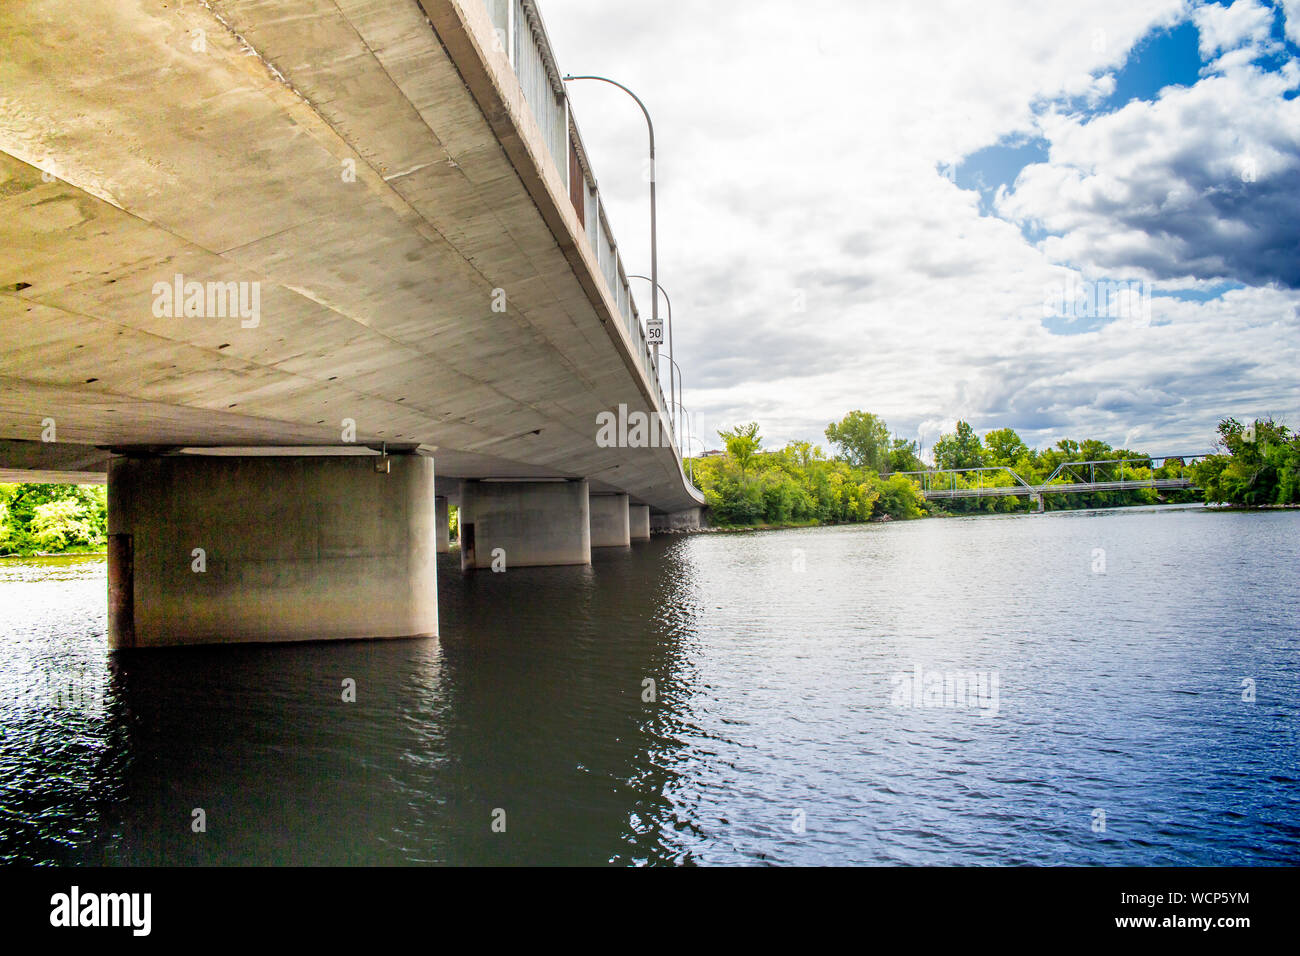 Rippling water of a river flows under a concrete roadway bridge, viewed from below. Stock Photo